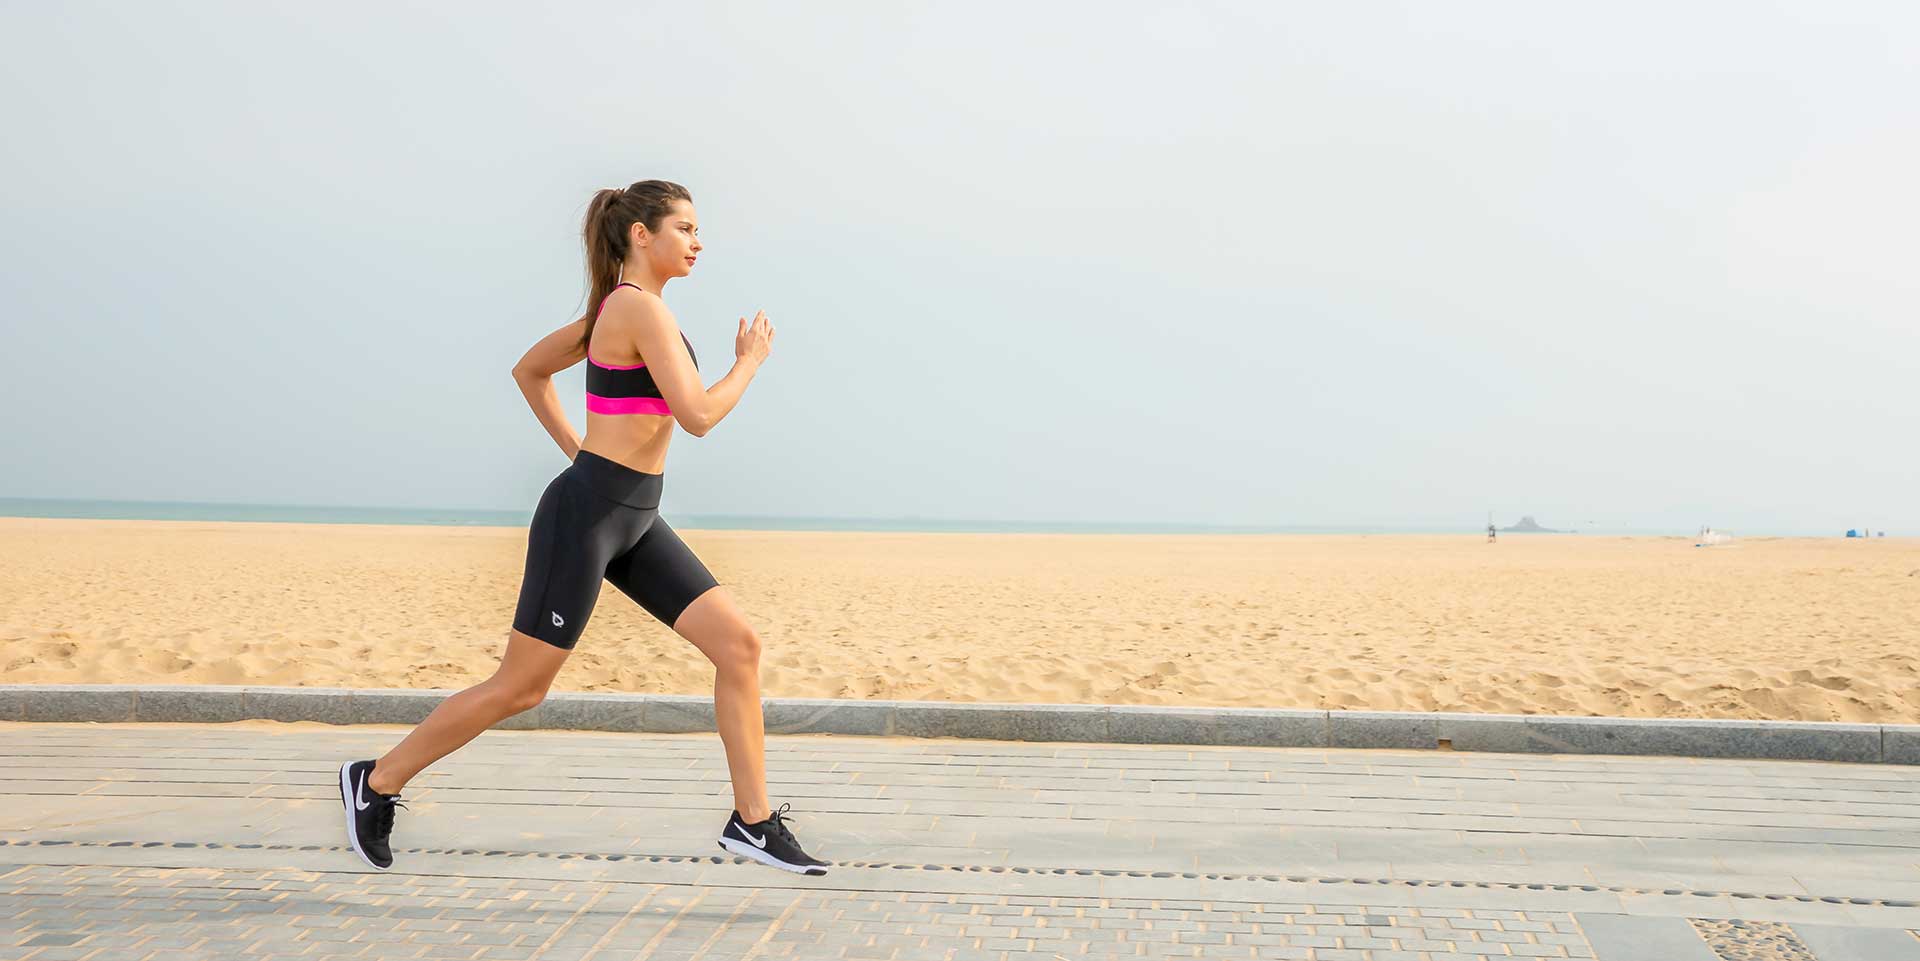 Digestion To Joint Health: Here's Why Jogging For 30 Minutes Daily